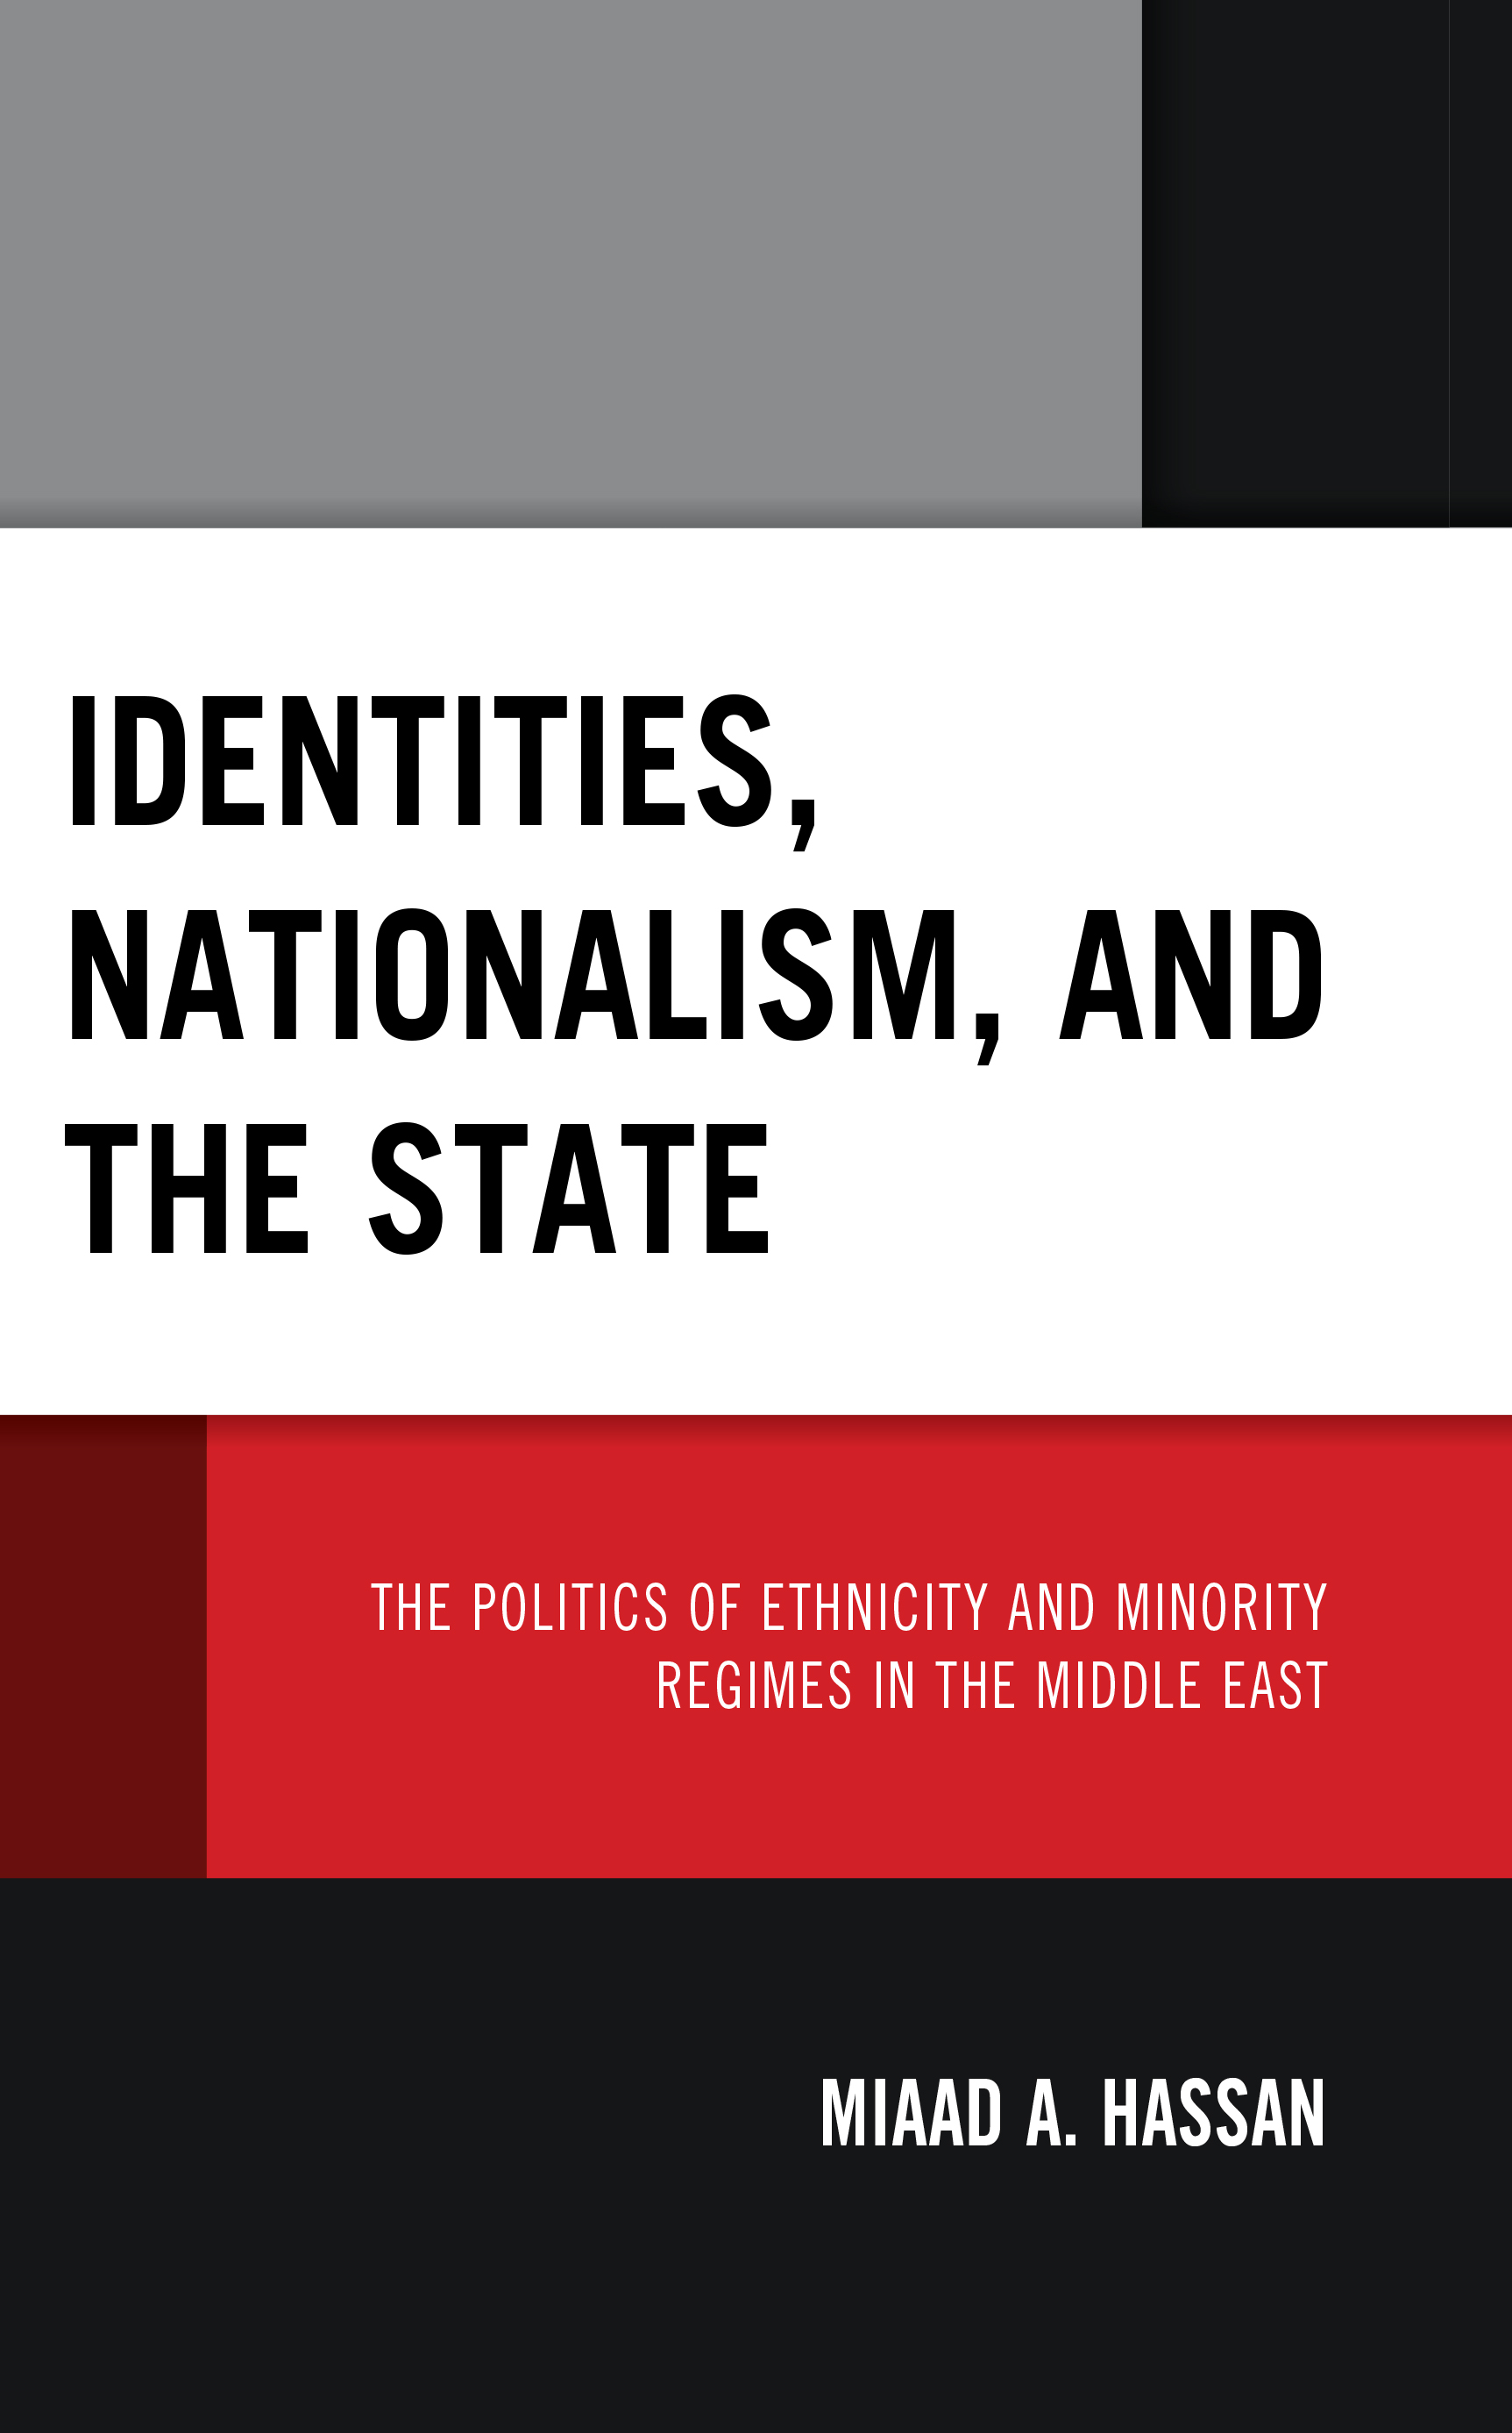 Identities, Nationalism, and the State: The Politics of Ethnicity and Minority Regimes in the Middle East